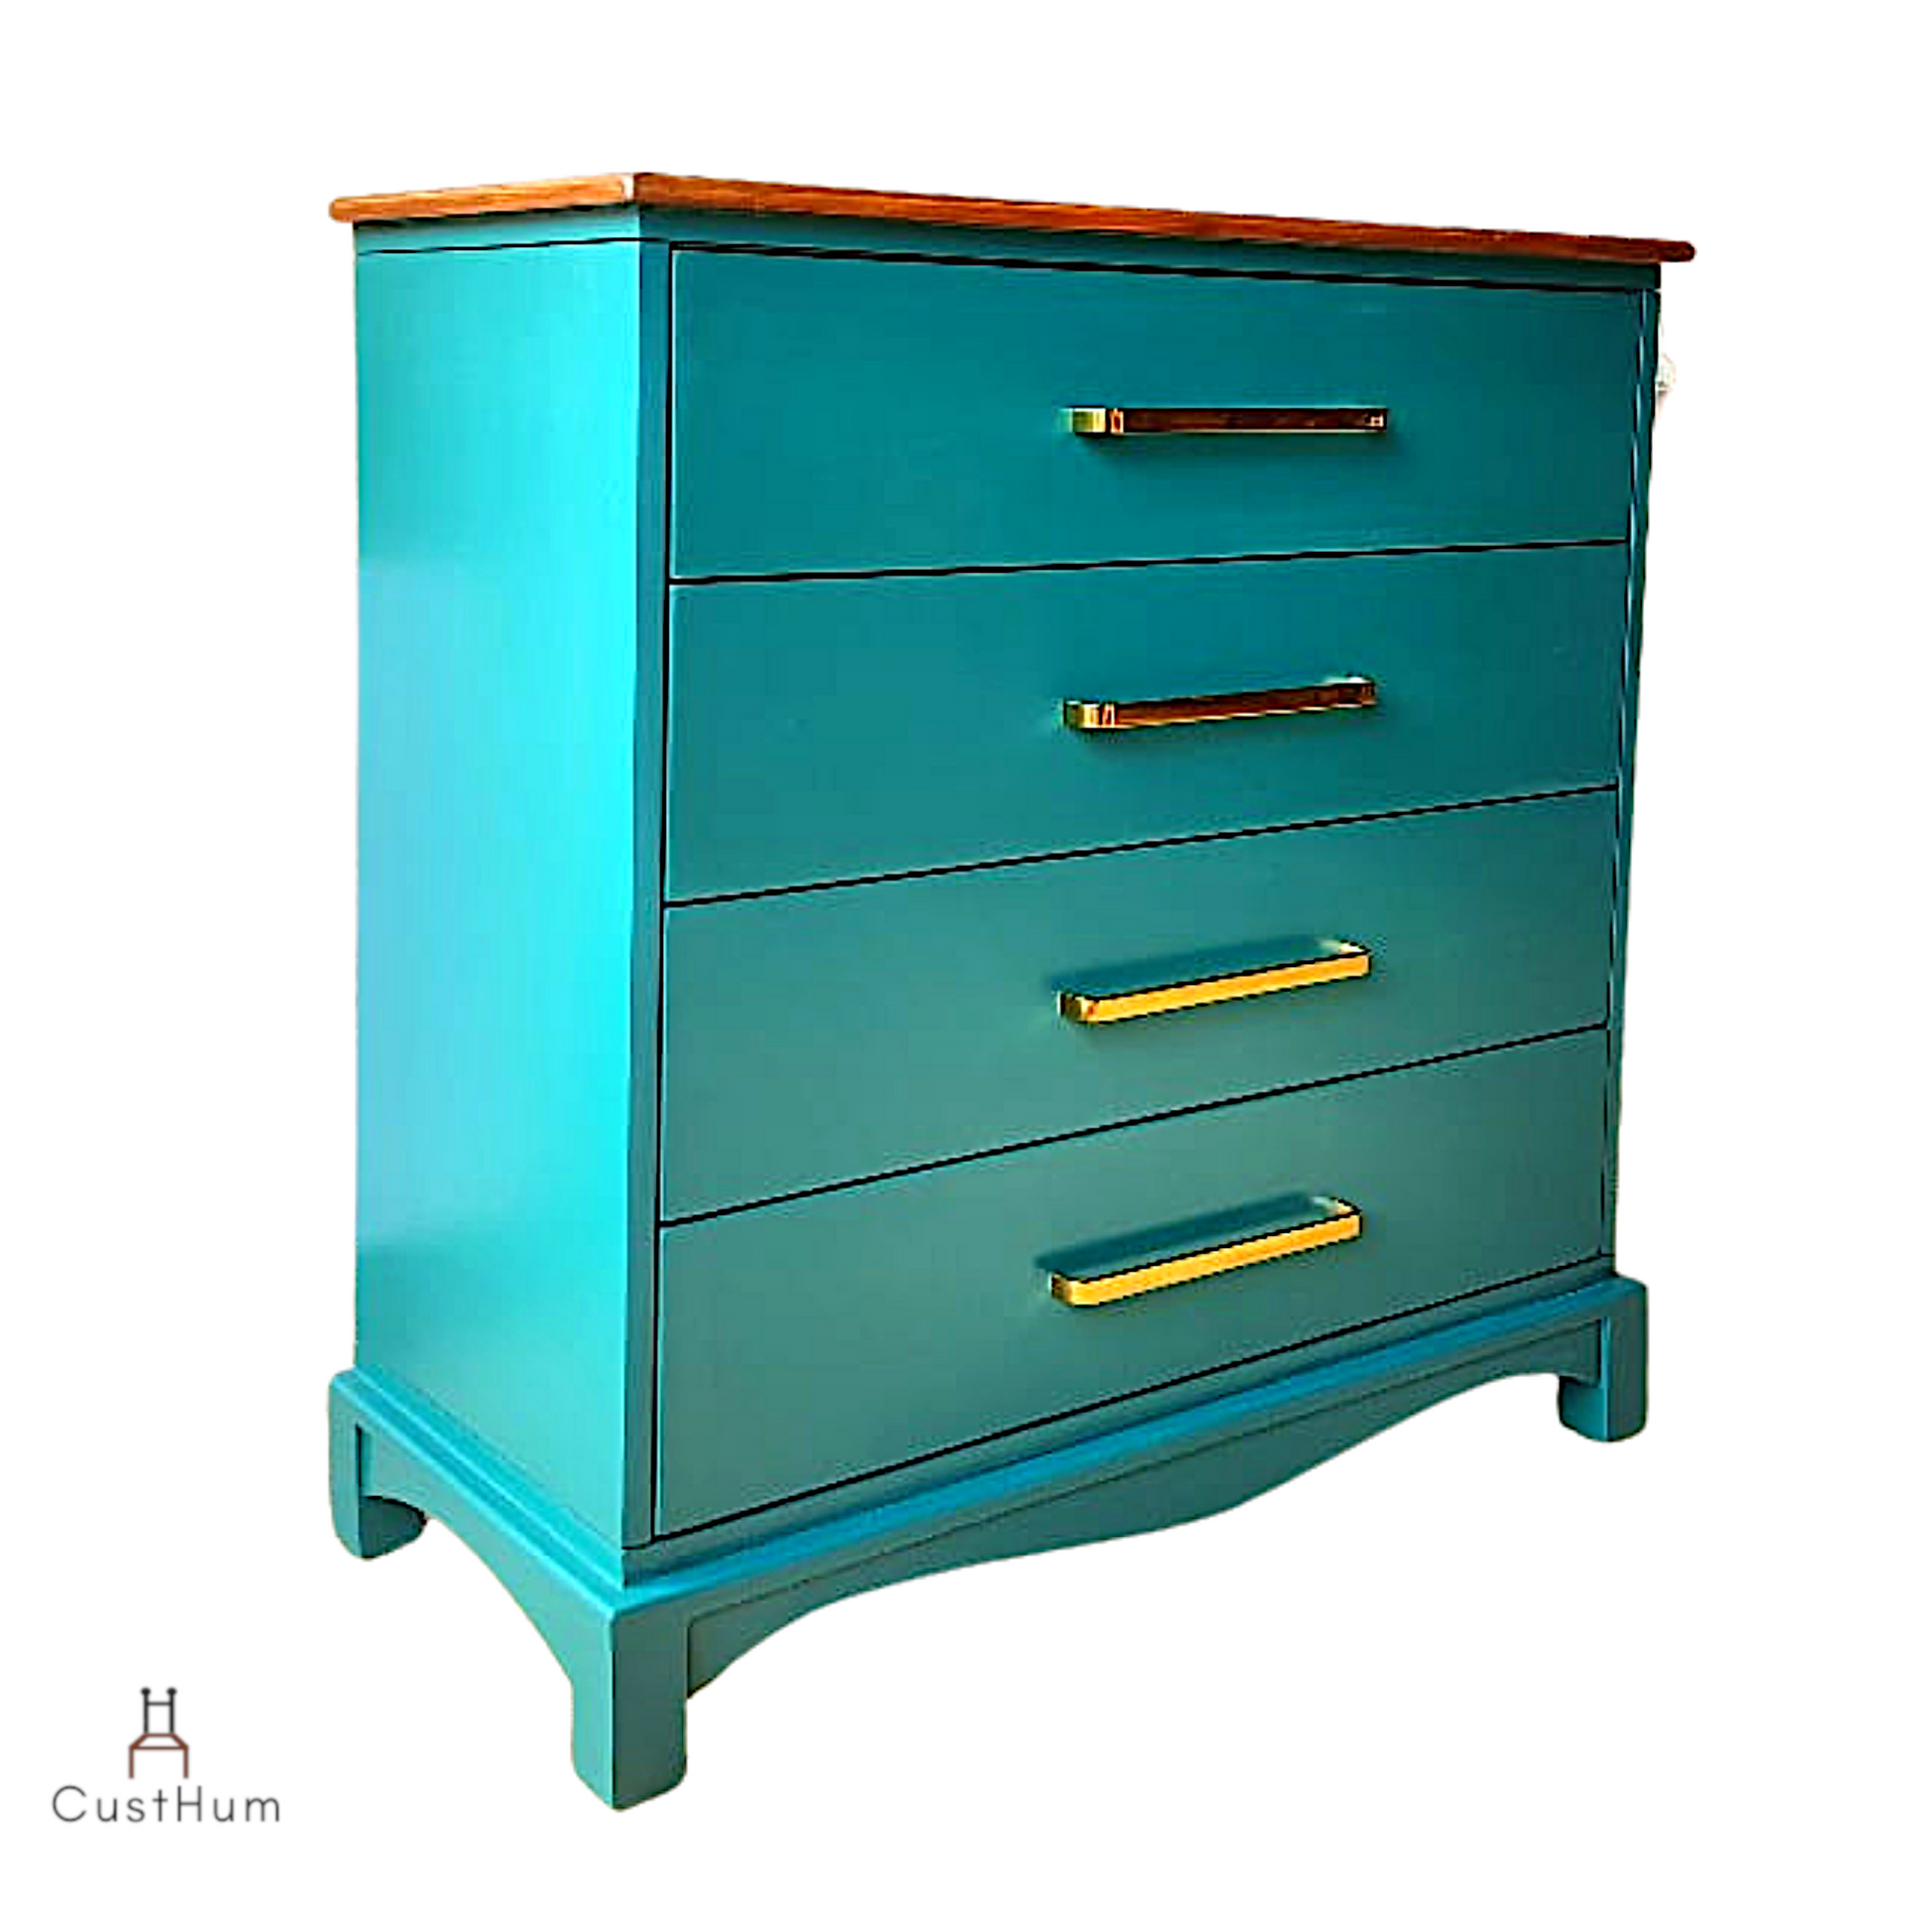 CustHum Verdure-vintage modern chest of drawers in duck plume green color and with sleek brass coated handles (ISO, closed)